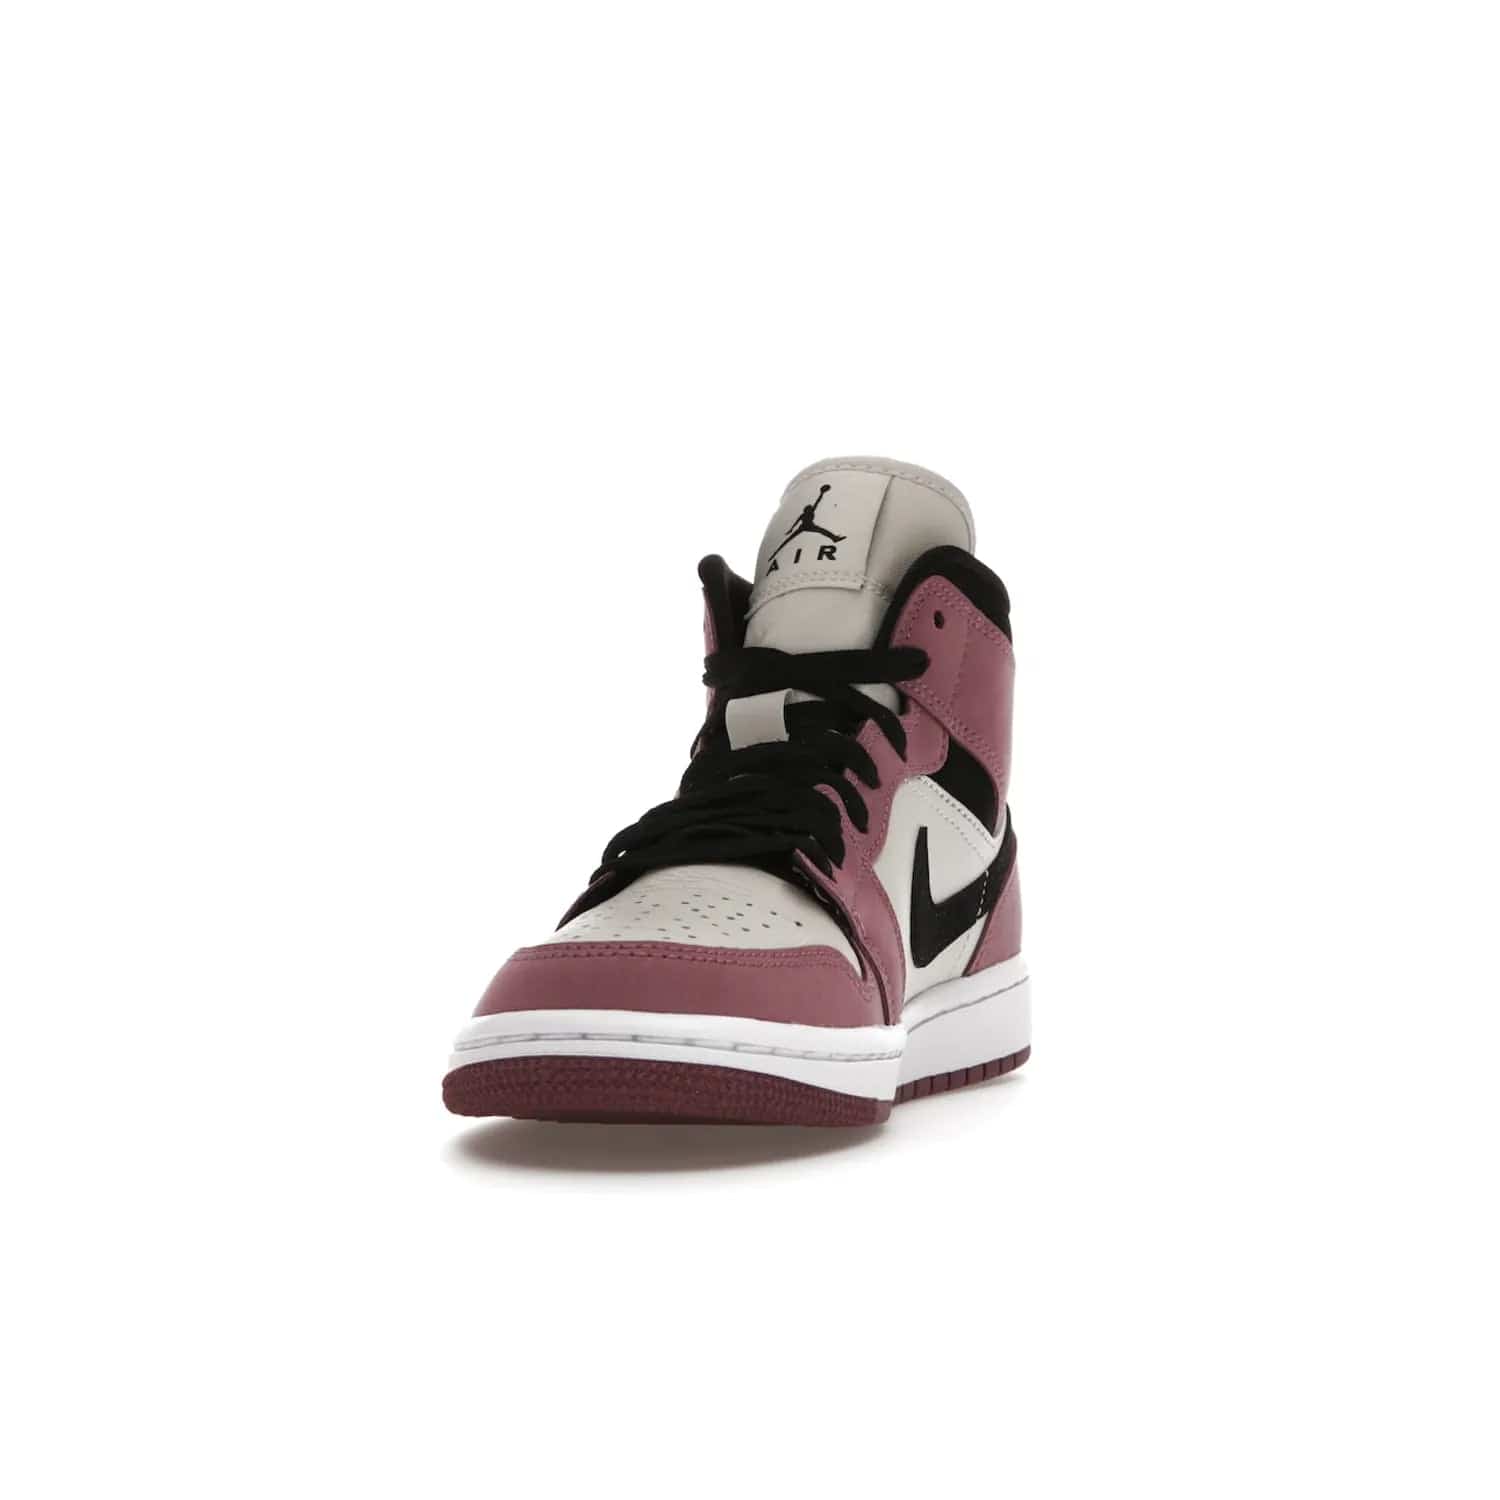 Jordan 1 Mid SE Light Mulberry (Women's) - Image 12 - Only at www.BallersClubKickz.com - Classic style meets performance with the Air Jordan 1 Mid Light Mulberry (Women's). Sleek leather overlays and light bone detailing bring out the best of this classic sneaker, perfect for the active woman on-the-go. Available March 2022.